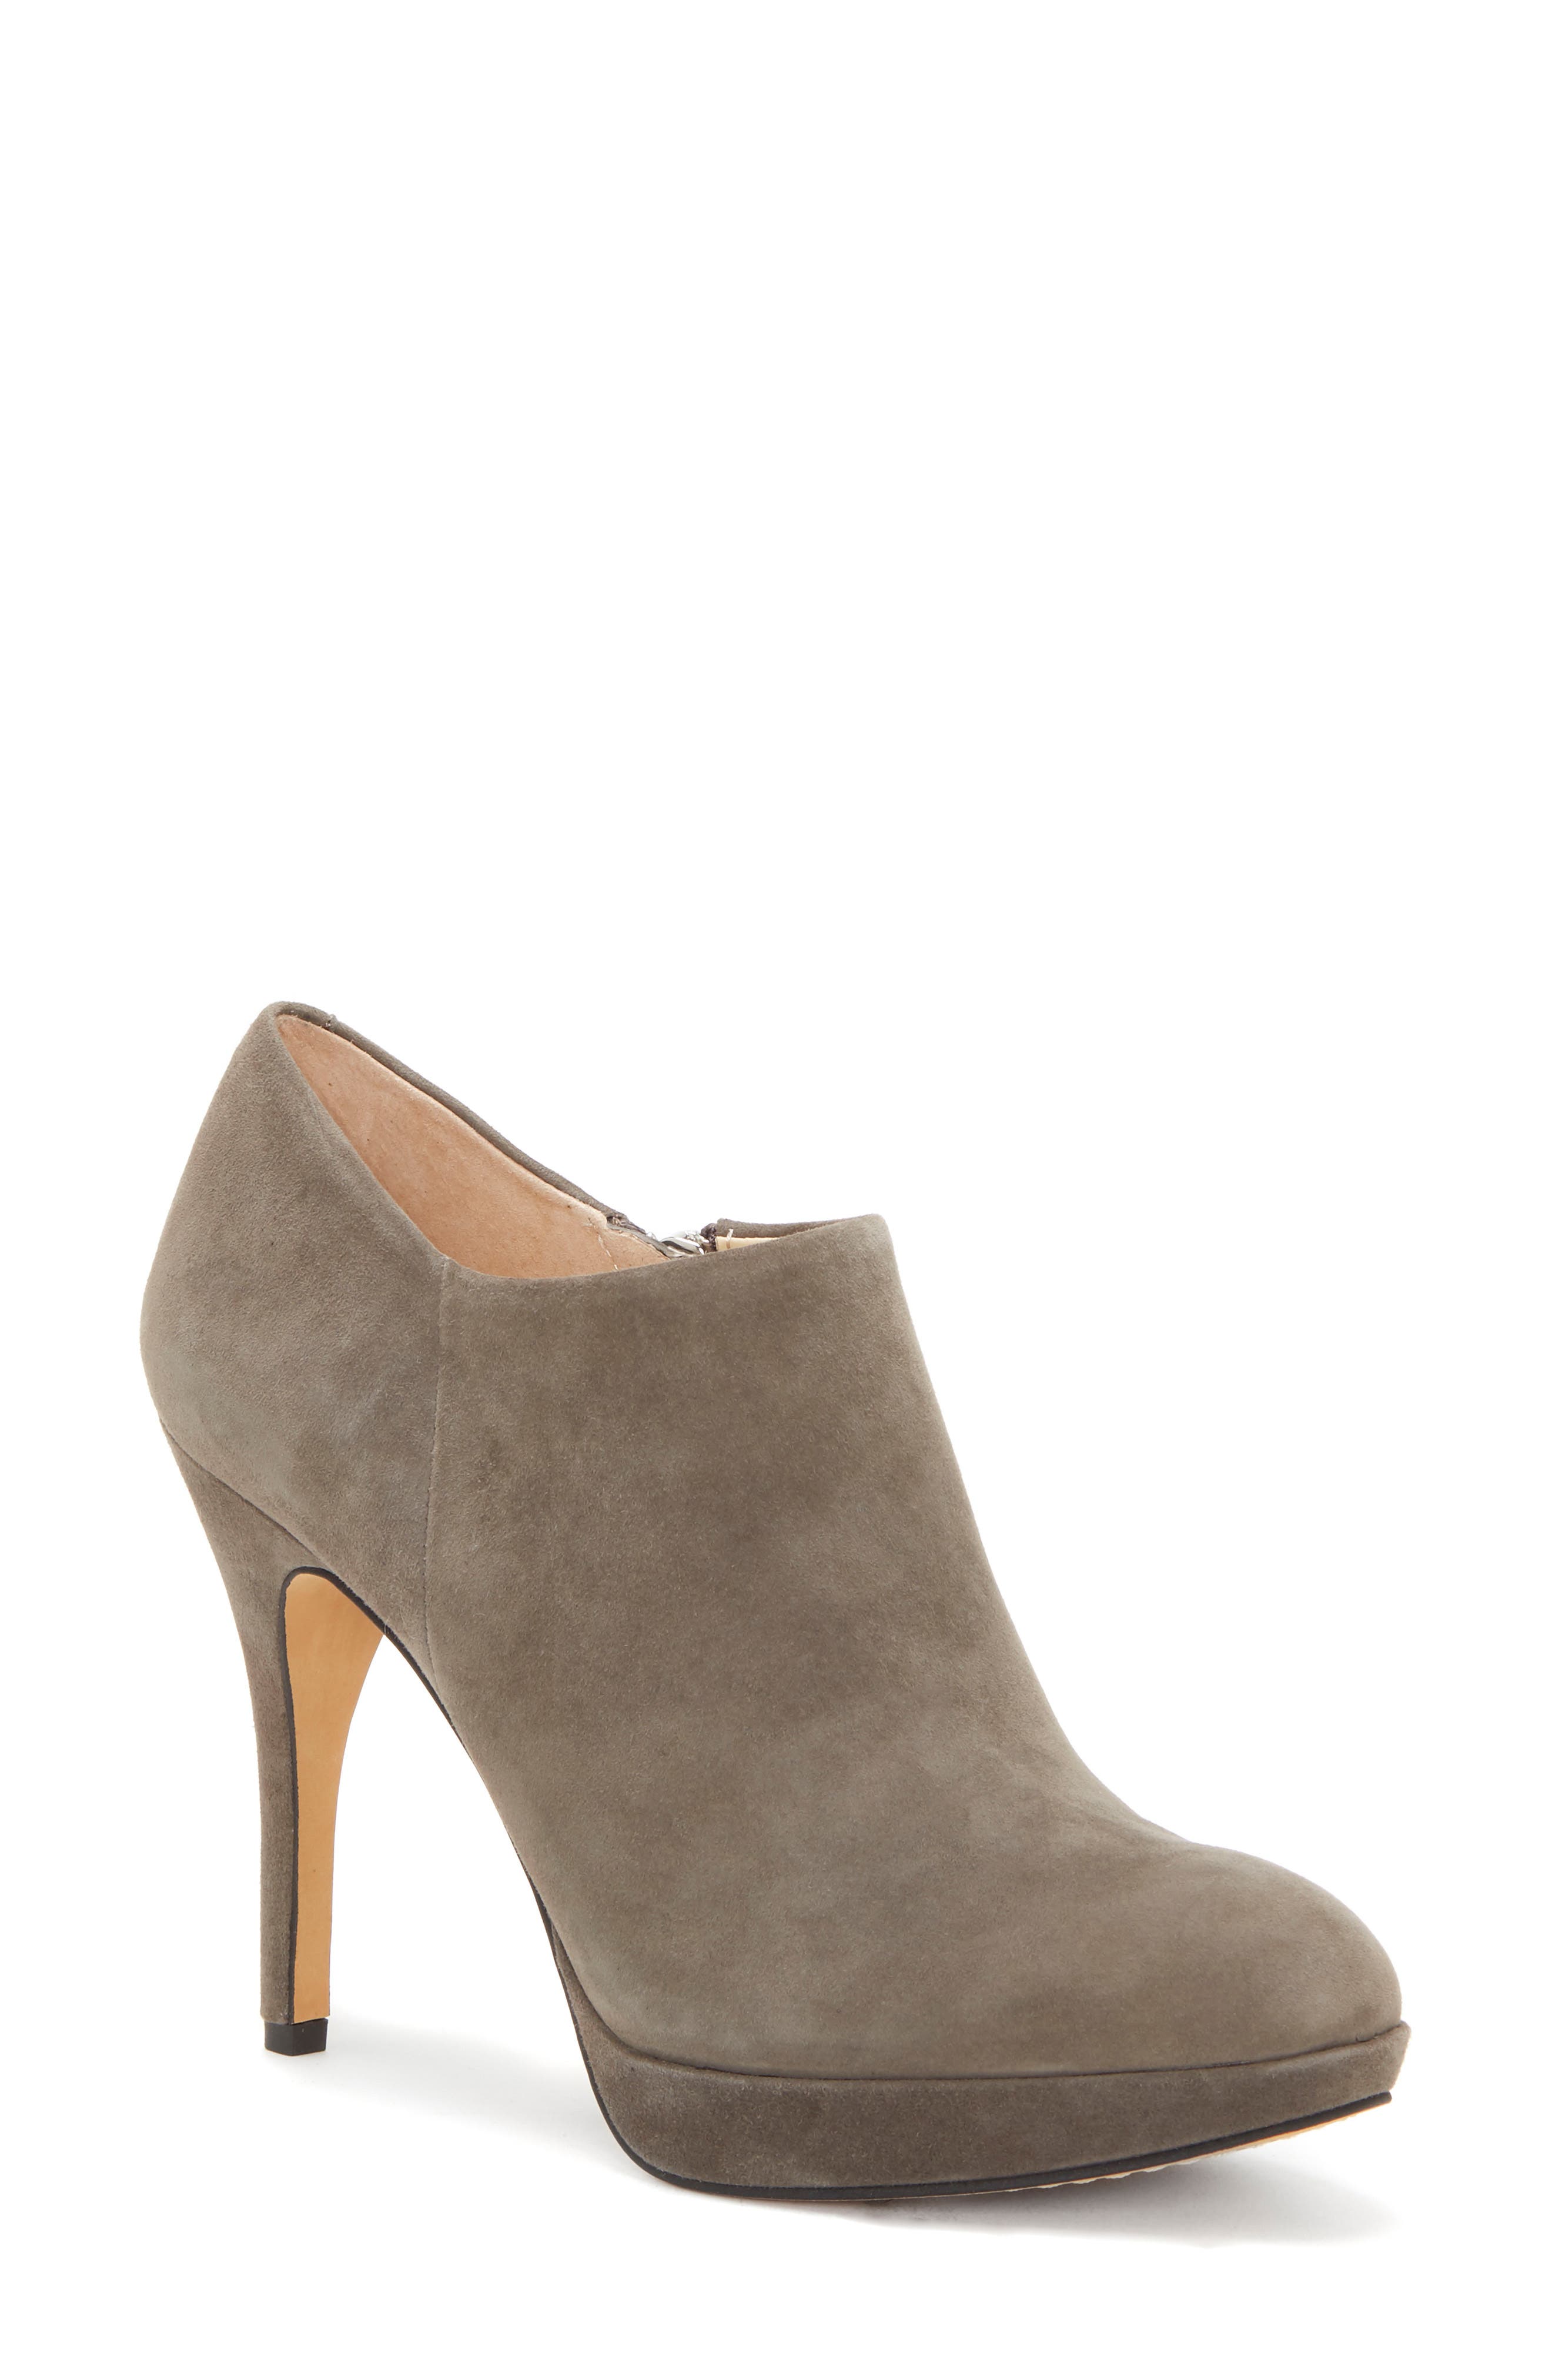 Vince camuto shoes | Nordstrom